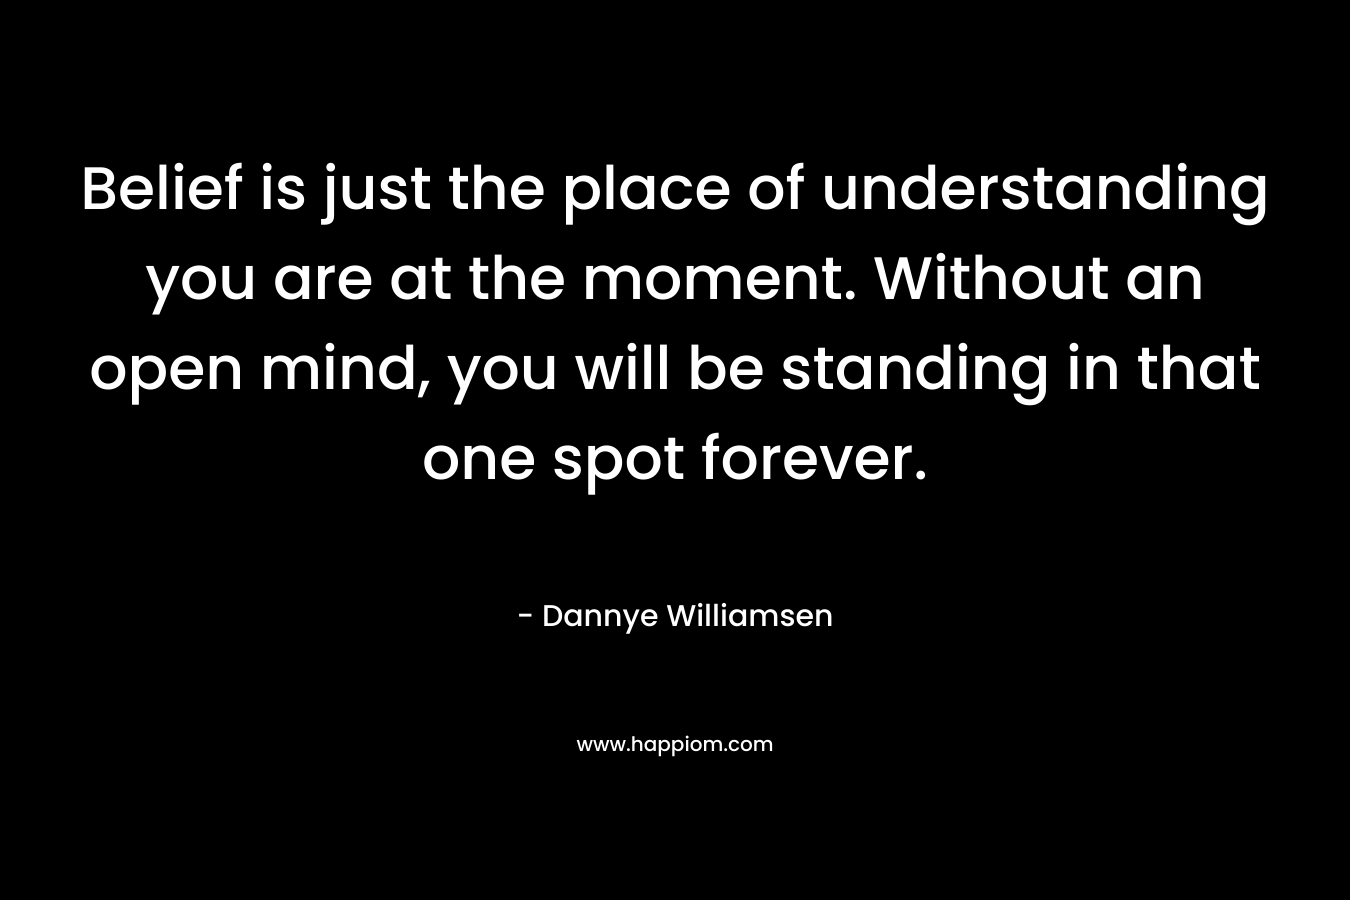 Belief is just the place of understanding you are at the moment. Without an open mind, you will be standing in that one spot forever. – Dannye Williamsen